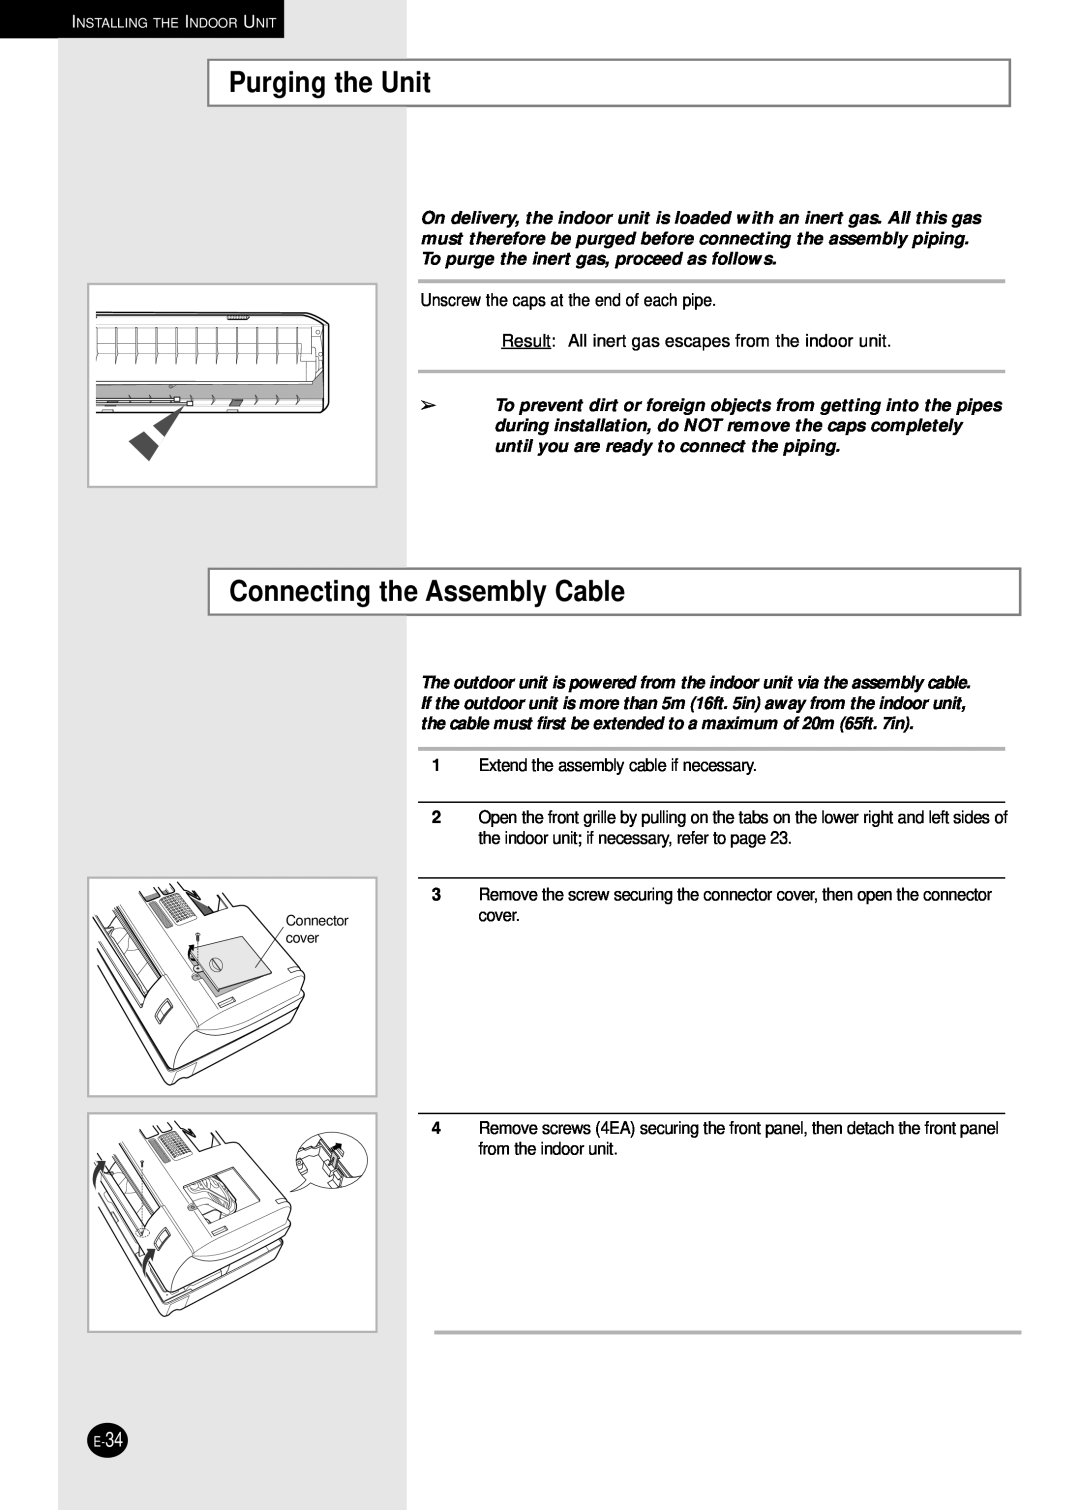 Samsung AQ30C1(2)BC installation manual Purging the Unit, Connecting the Assembly Cable 